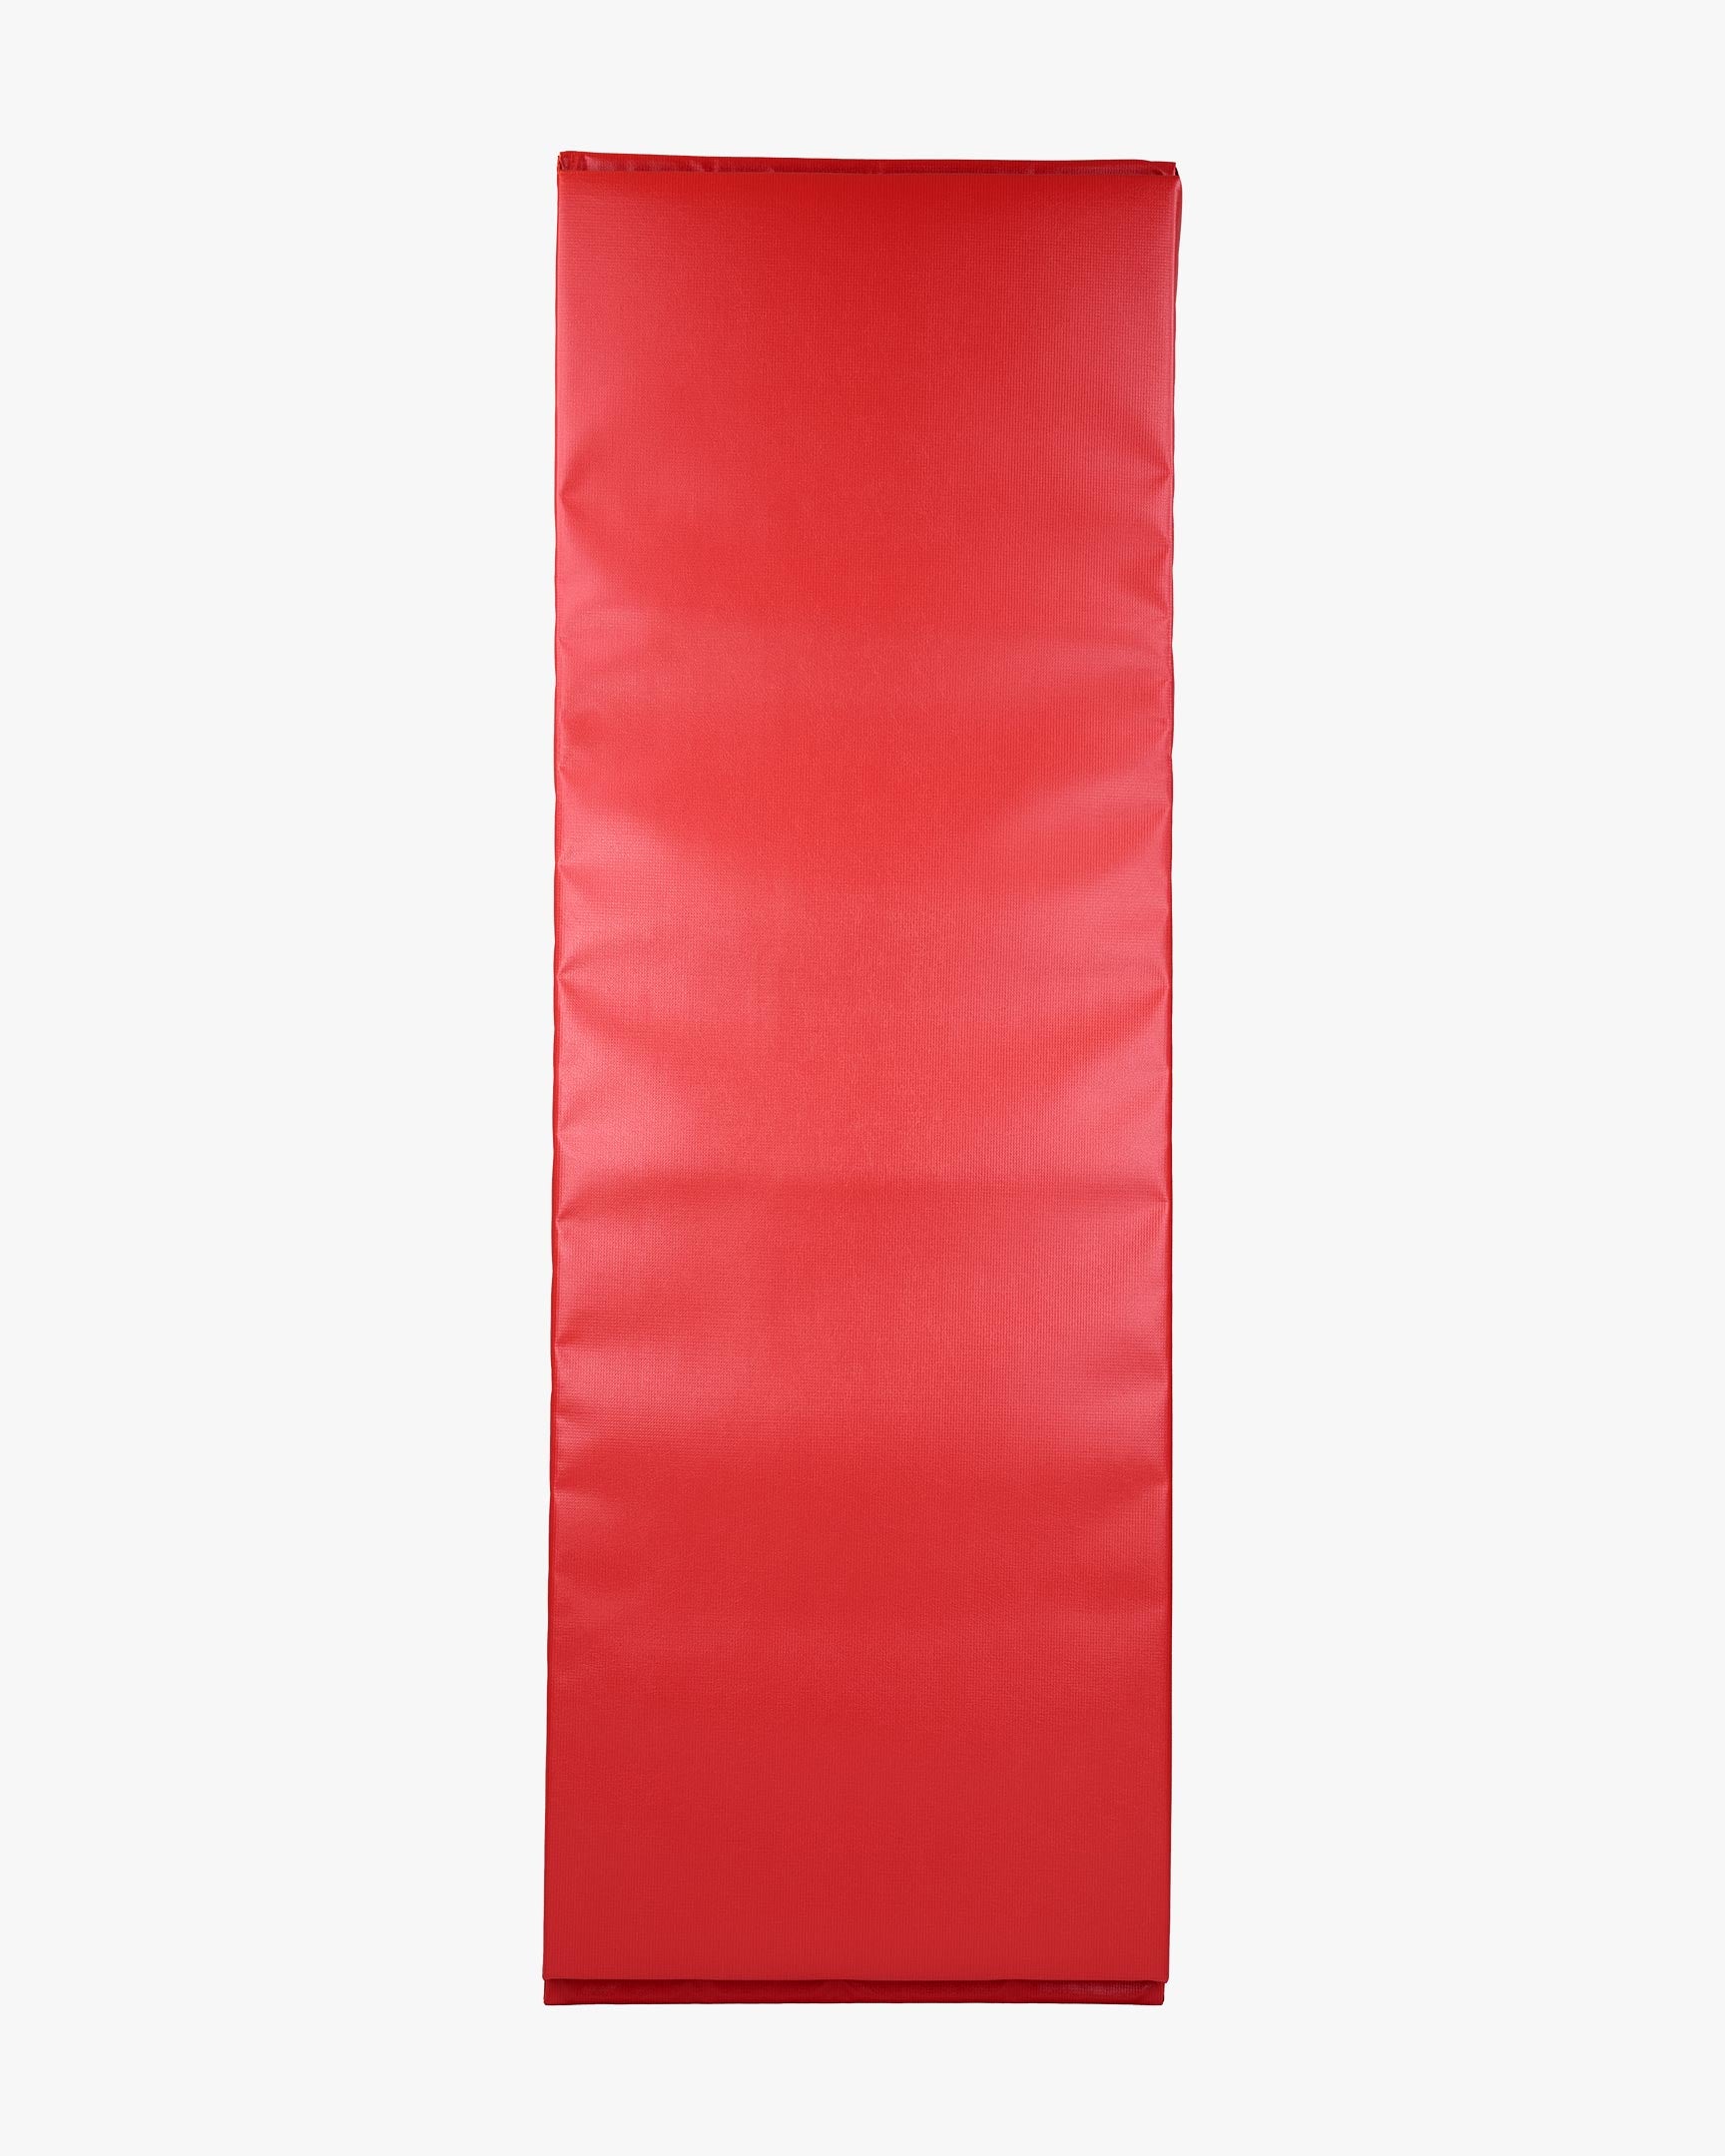 2' X 6' Wall Pad Flair Red